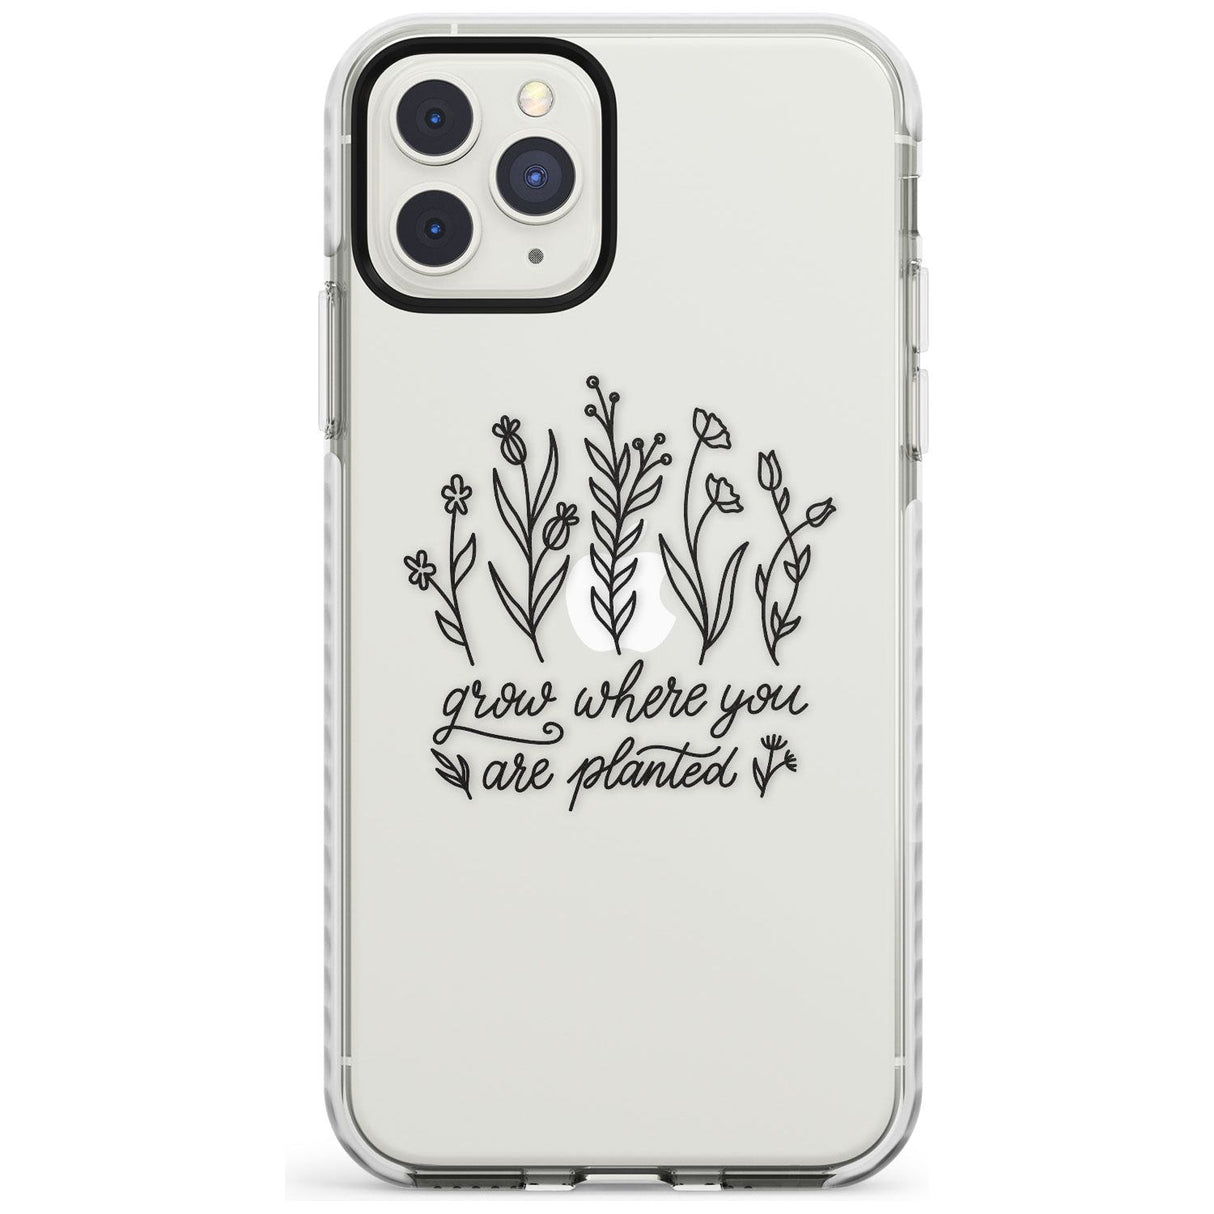 Grow where you are planted Impact Phone Case for iPhone 11 Pro Max